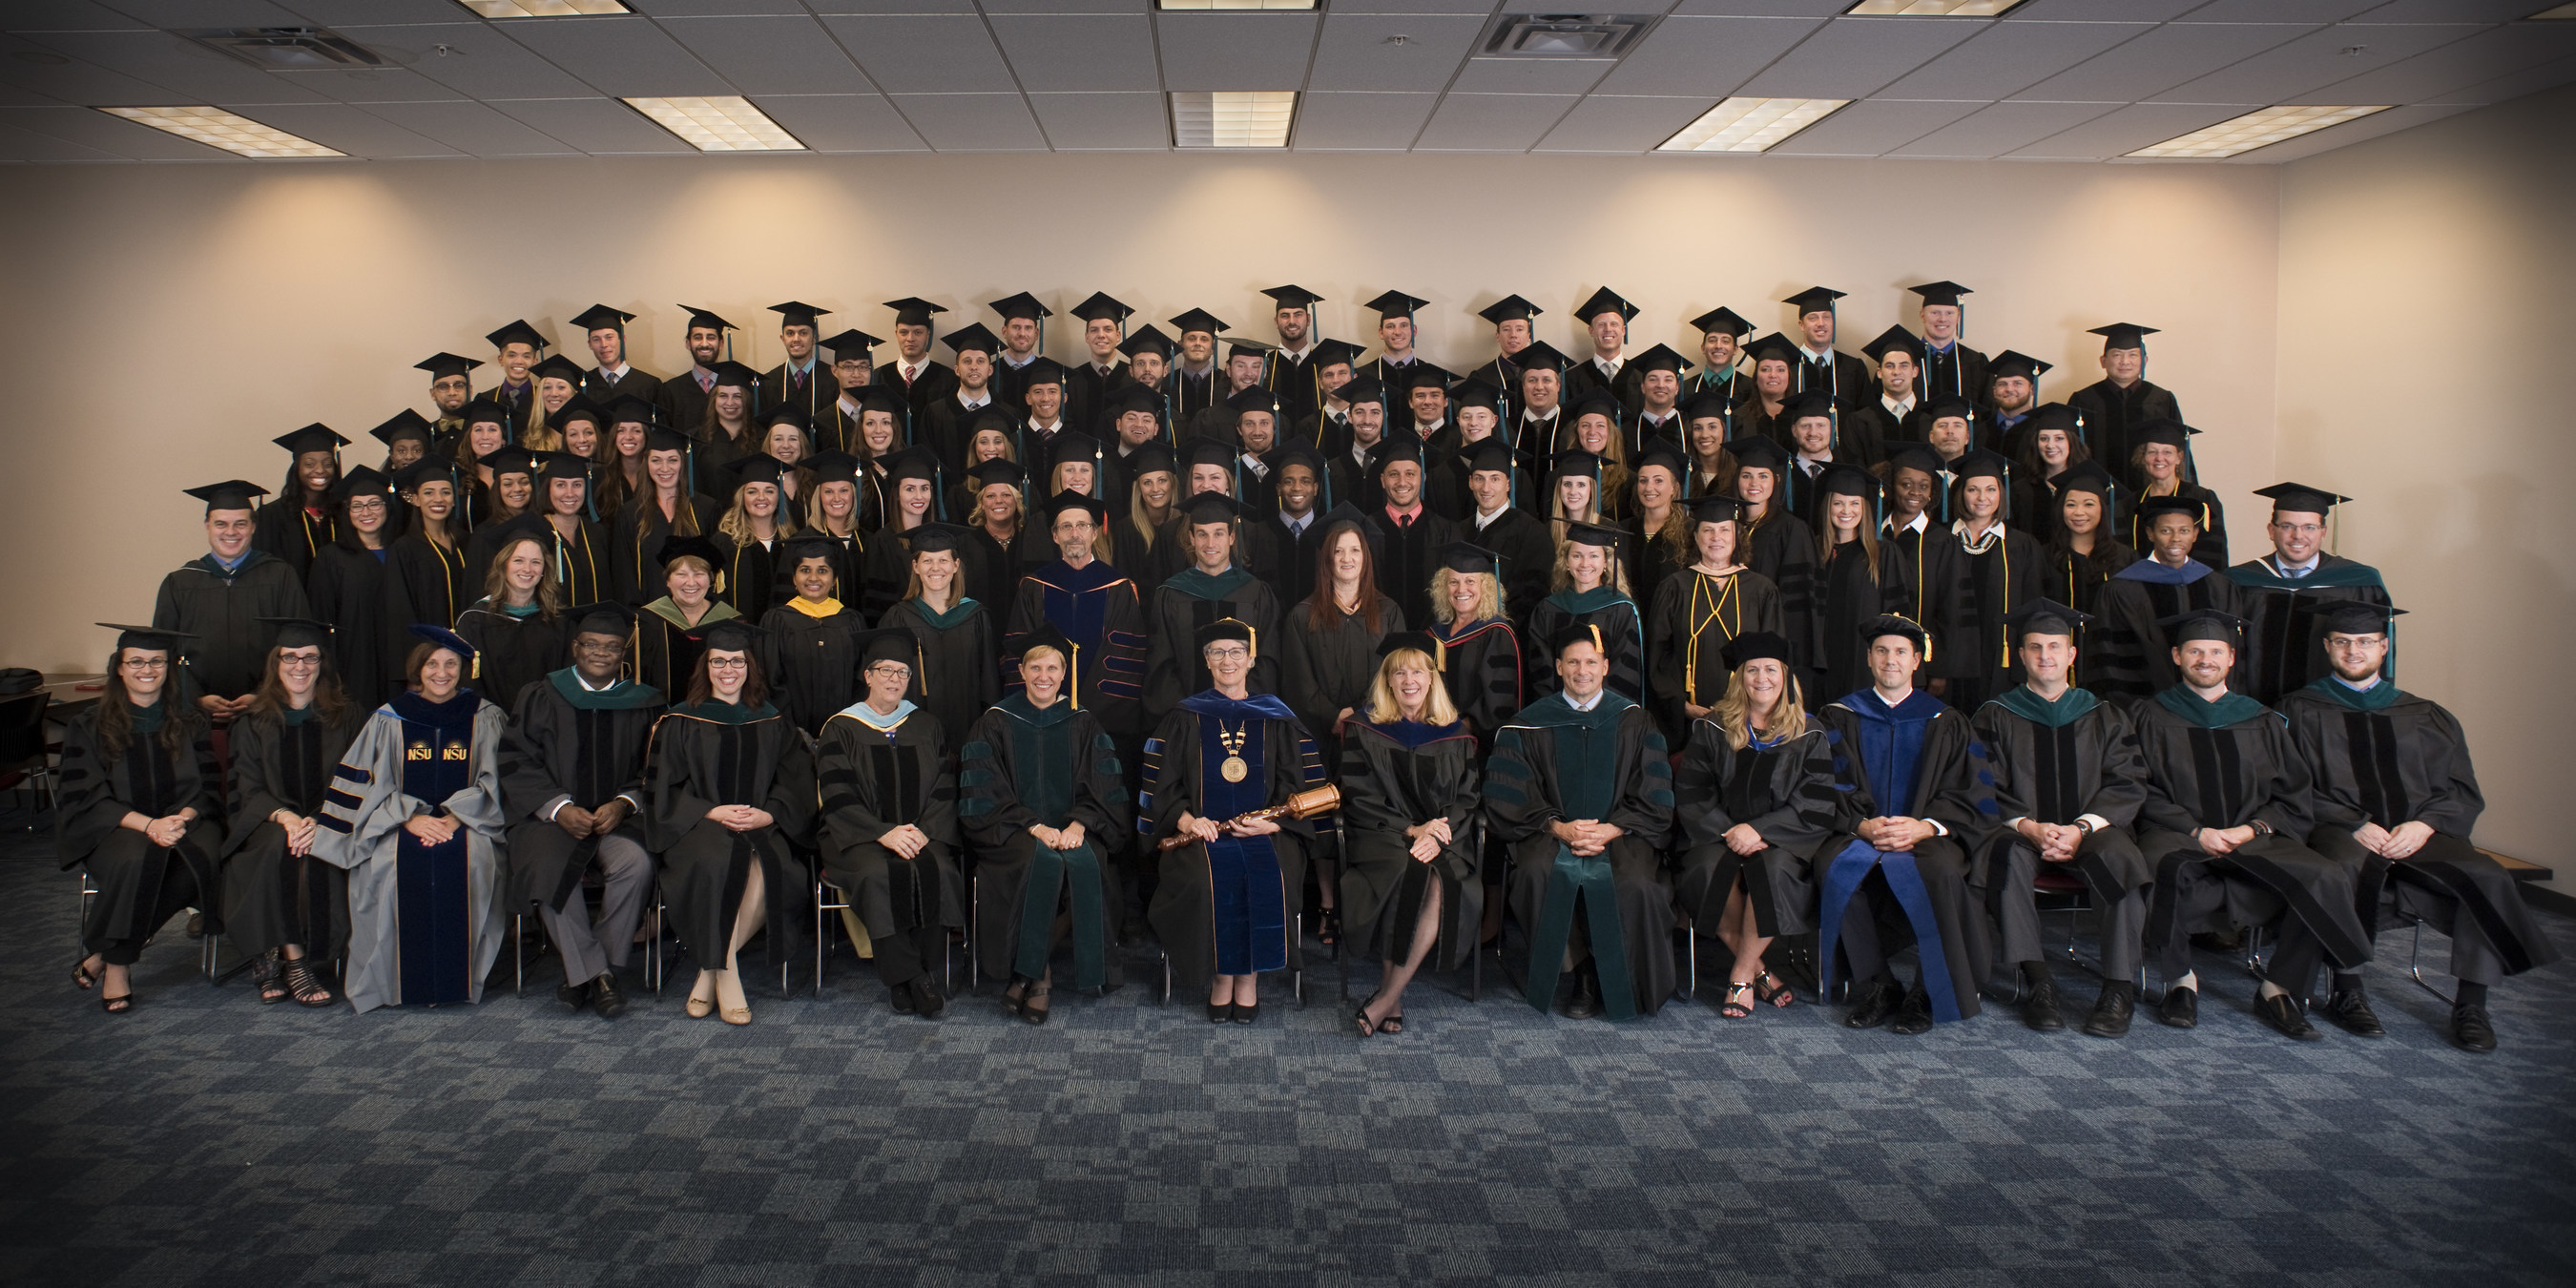 The University of St. Augustine for Health Sciences Florida campus in St. Augustine celebrated its spring commencement by presenting nearly 80 graduates with Doctor of Physical Therapy, Doctor of Occupational Therapy, Master of Occupational Therapy and Doctor of Education degrees.